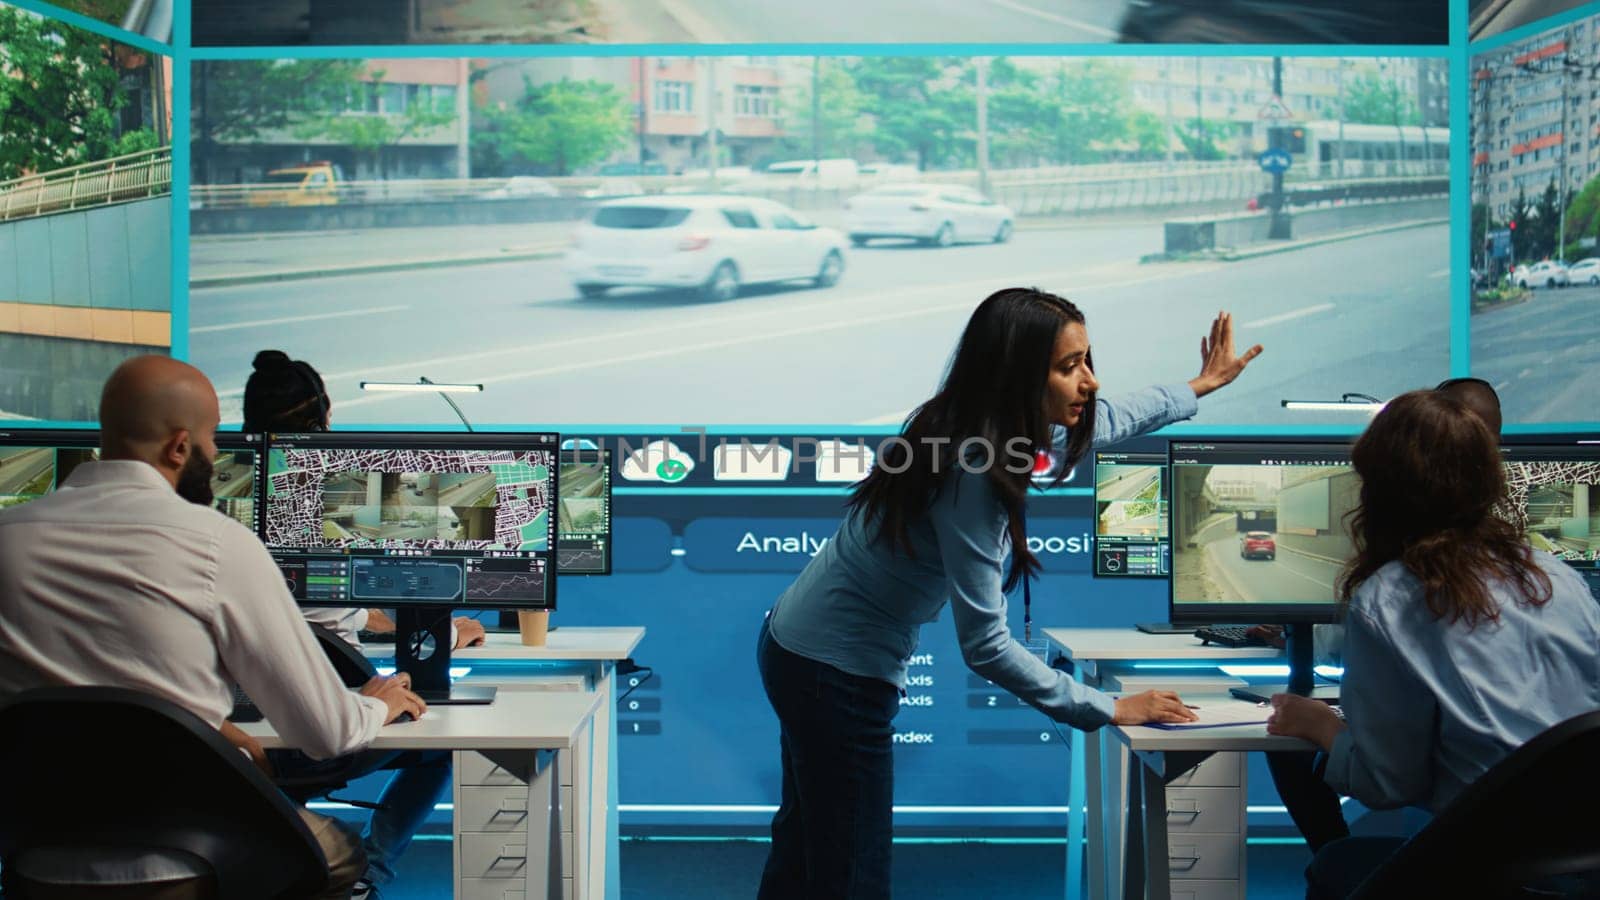 Indian supervisor leads her team to monitor the surveillance video footage by DCStudio